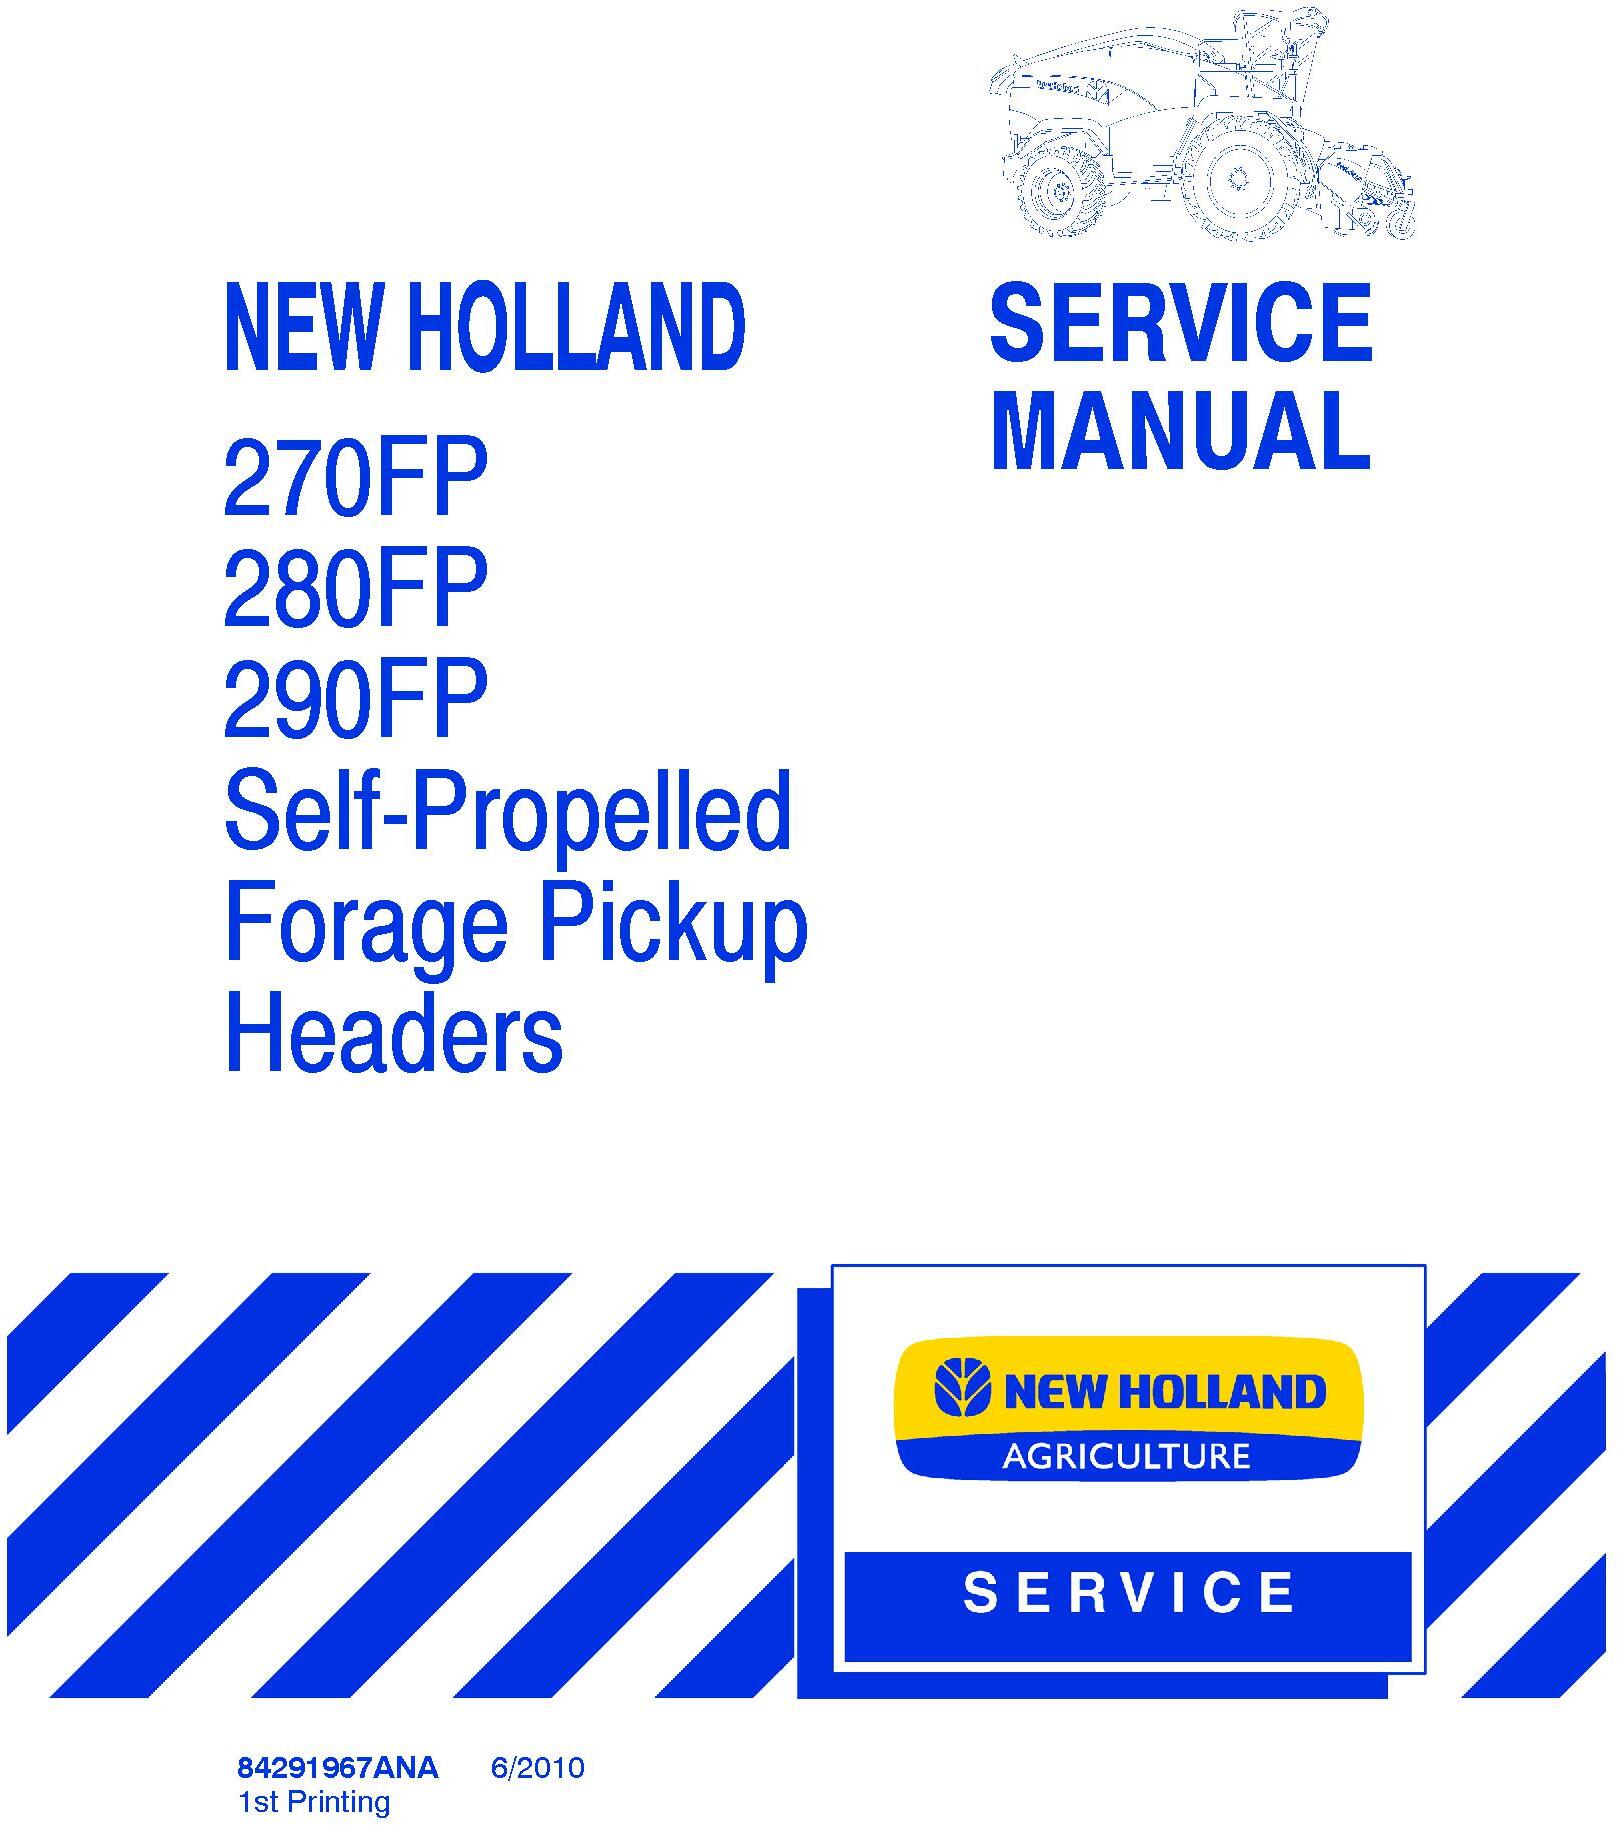 New Holland 270FP, 280FP, 290FP Self Propelled Forage Pickup Headers Service Manual - 20055